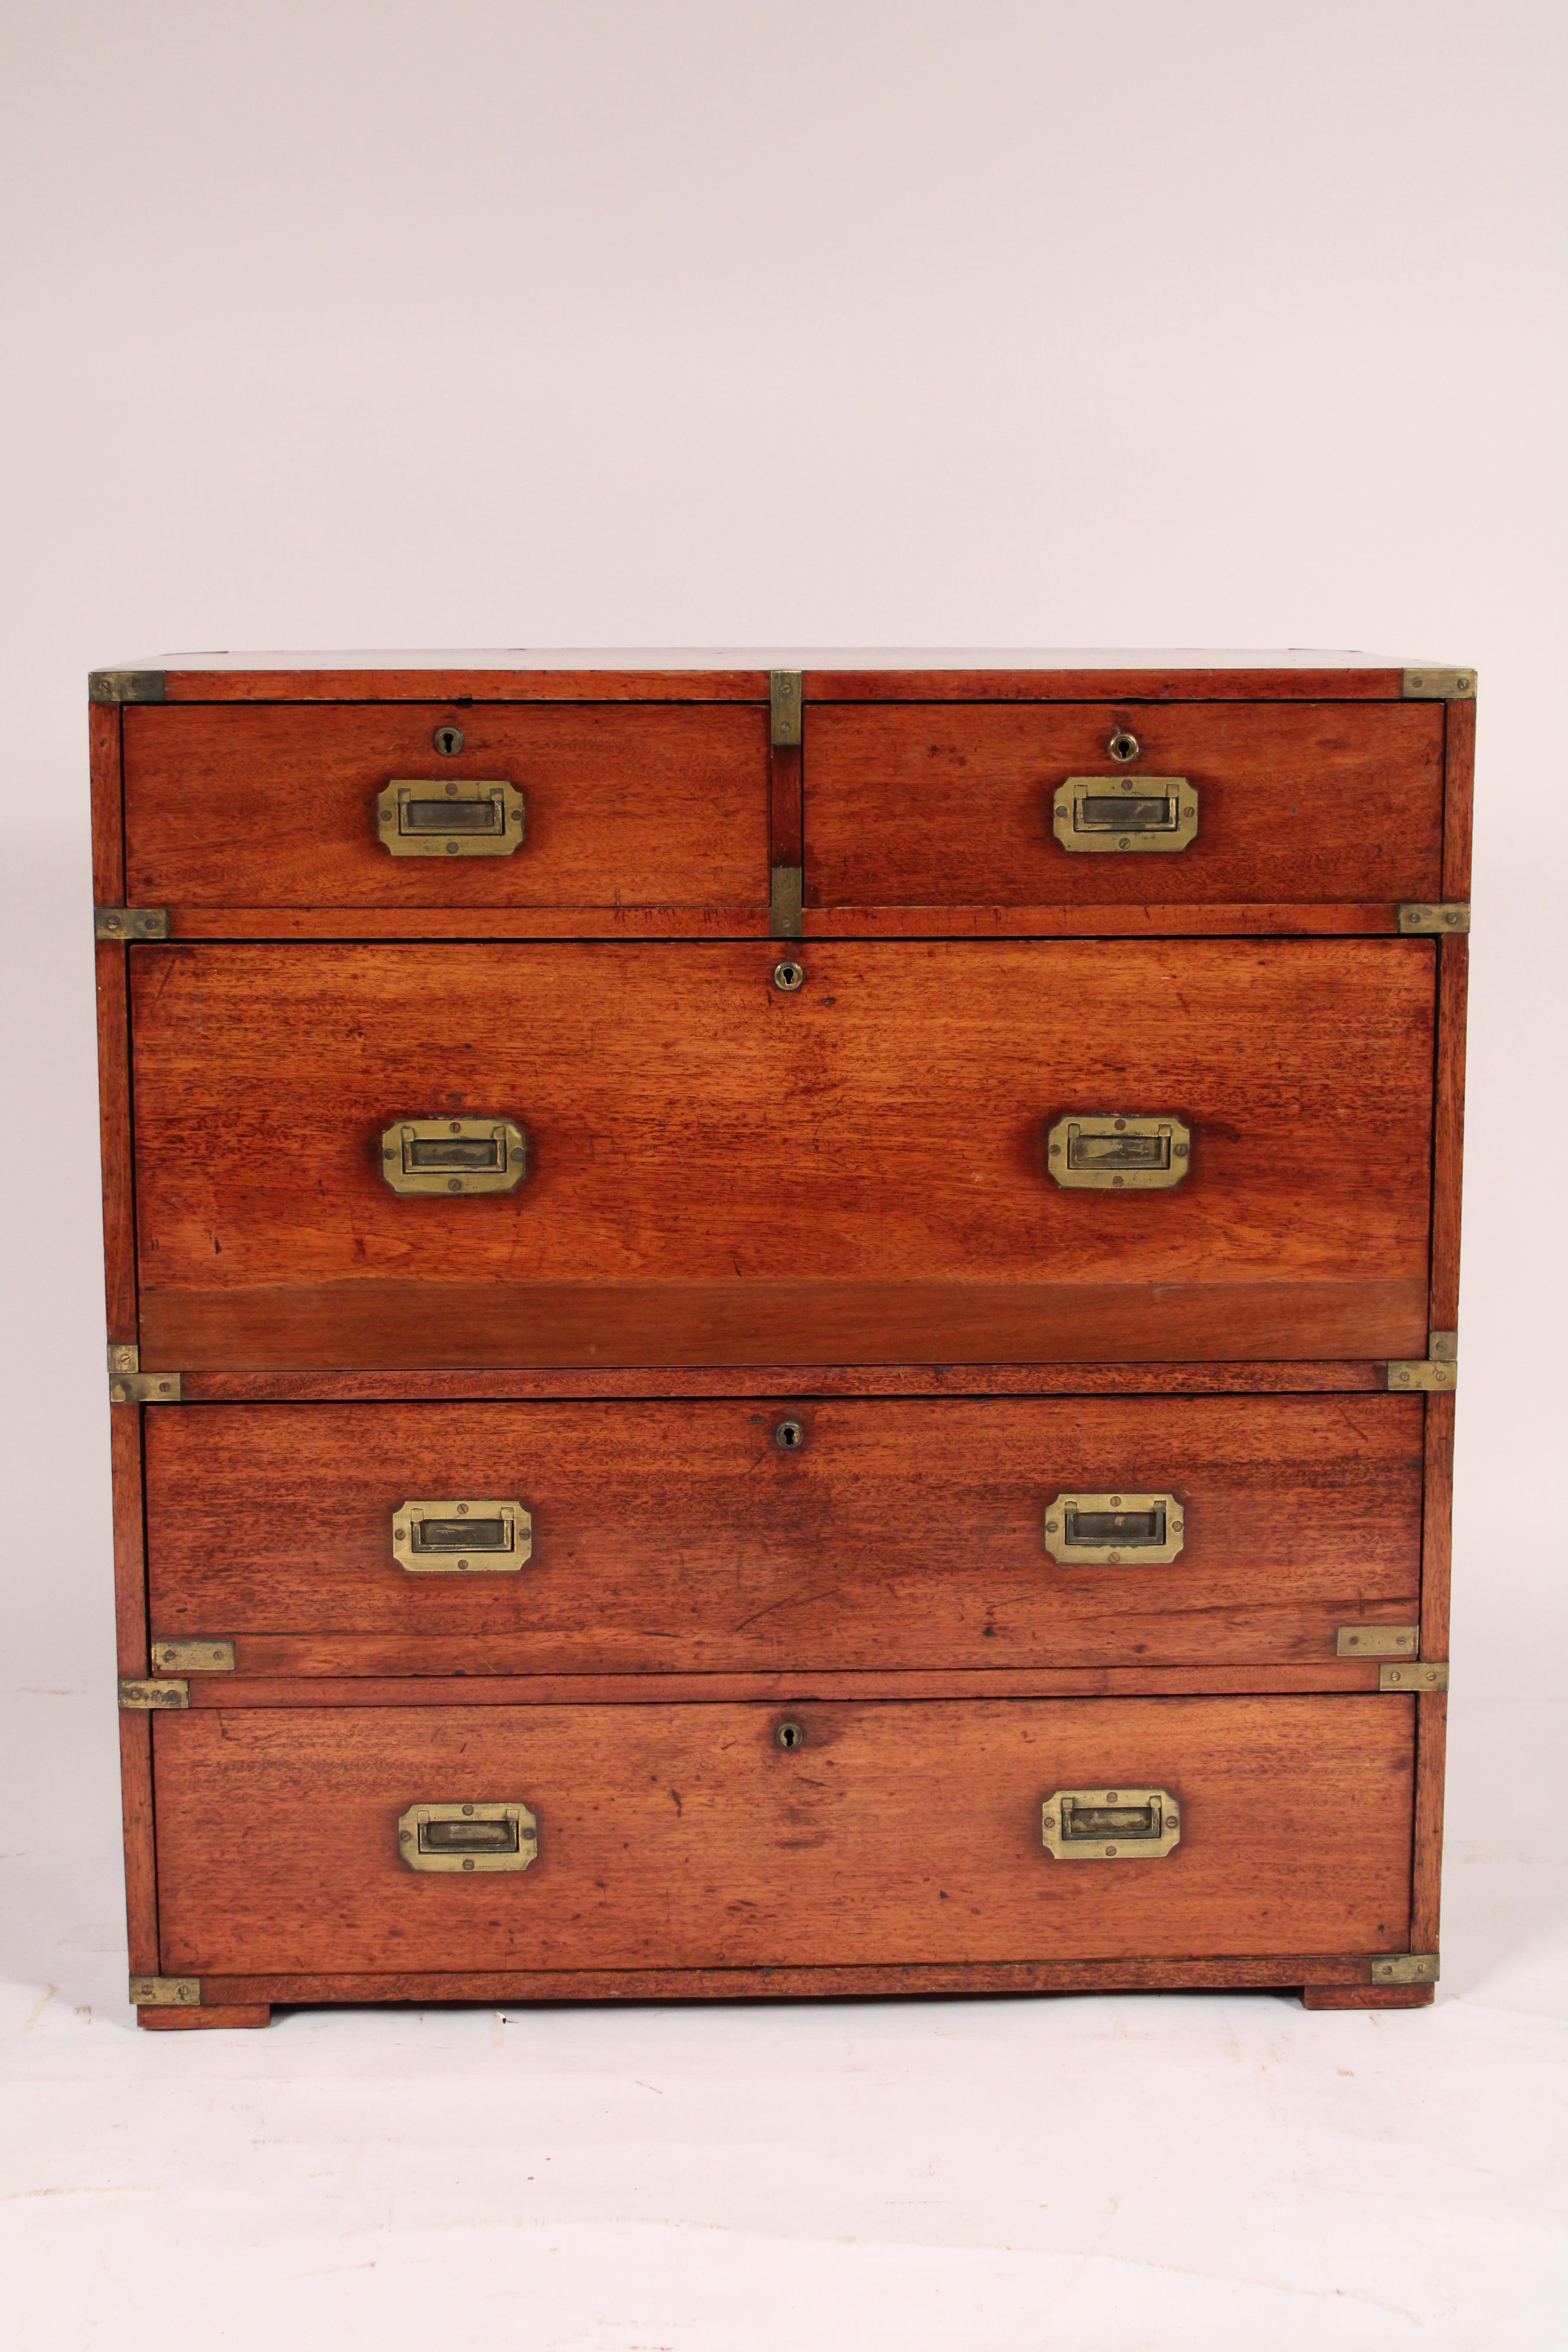 Antique Camphor Wood two part Campaign Chest, circa 1890. With a rectangular top, two upper drawers and 3 lower drawers, all with original brass campaign hardware. Hand dove tailed drawer construction. The camphor wood has a nice old patina.